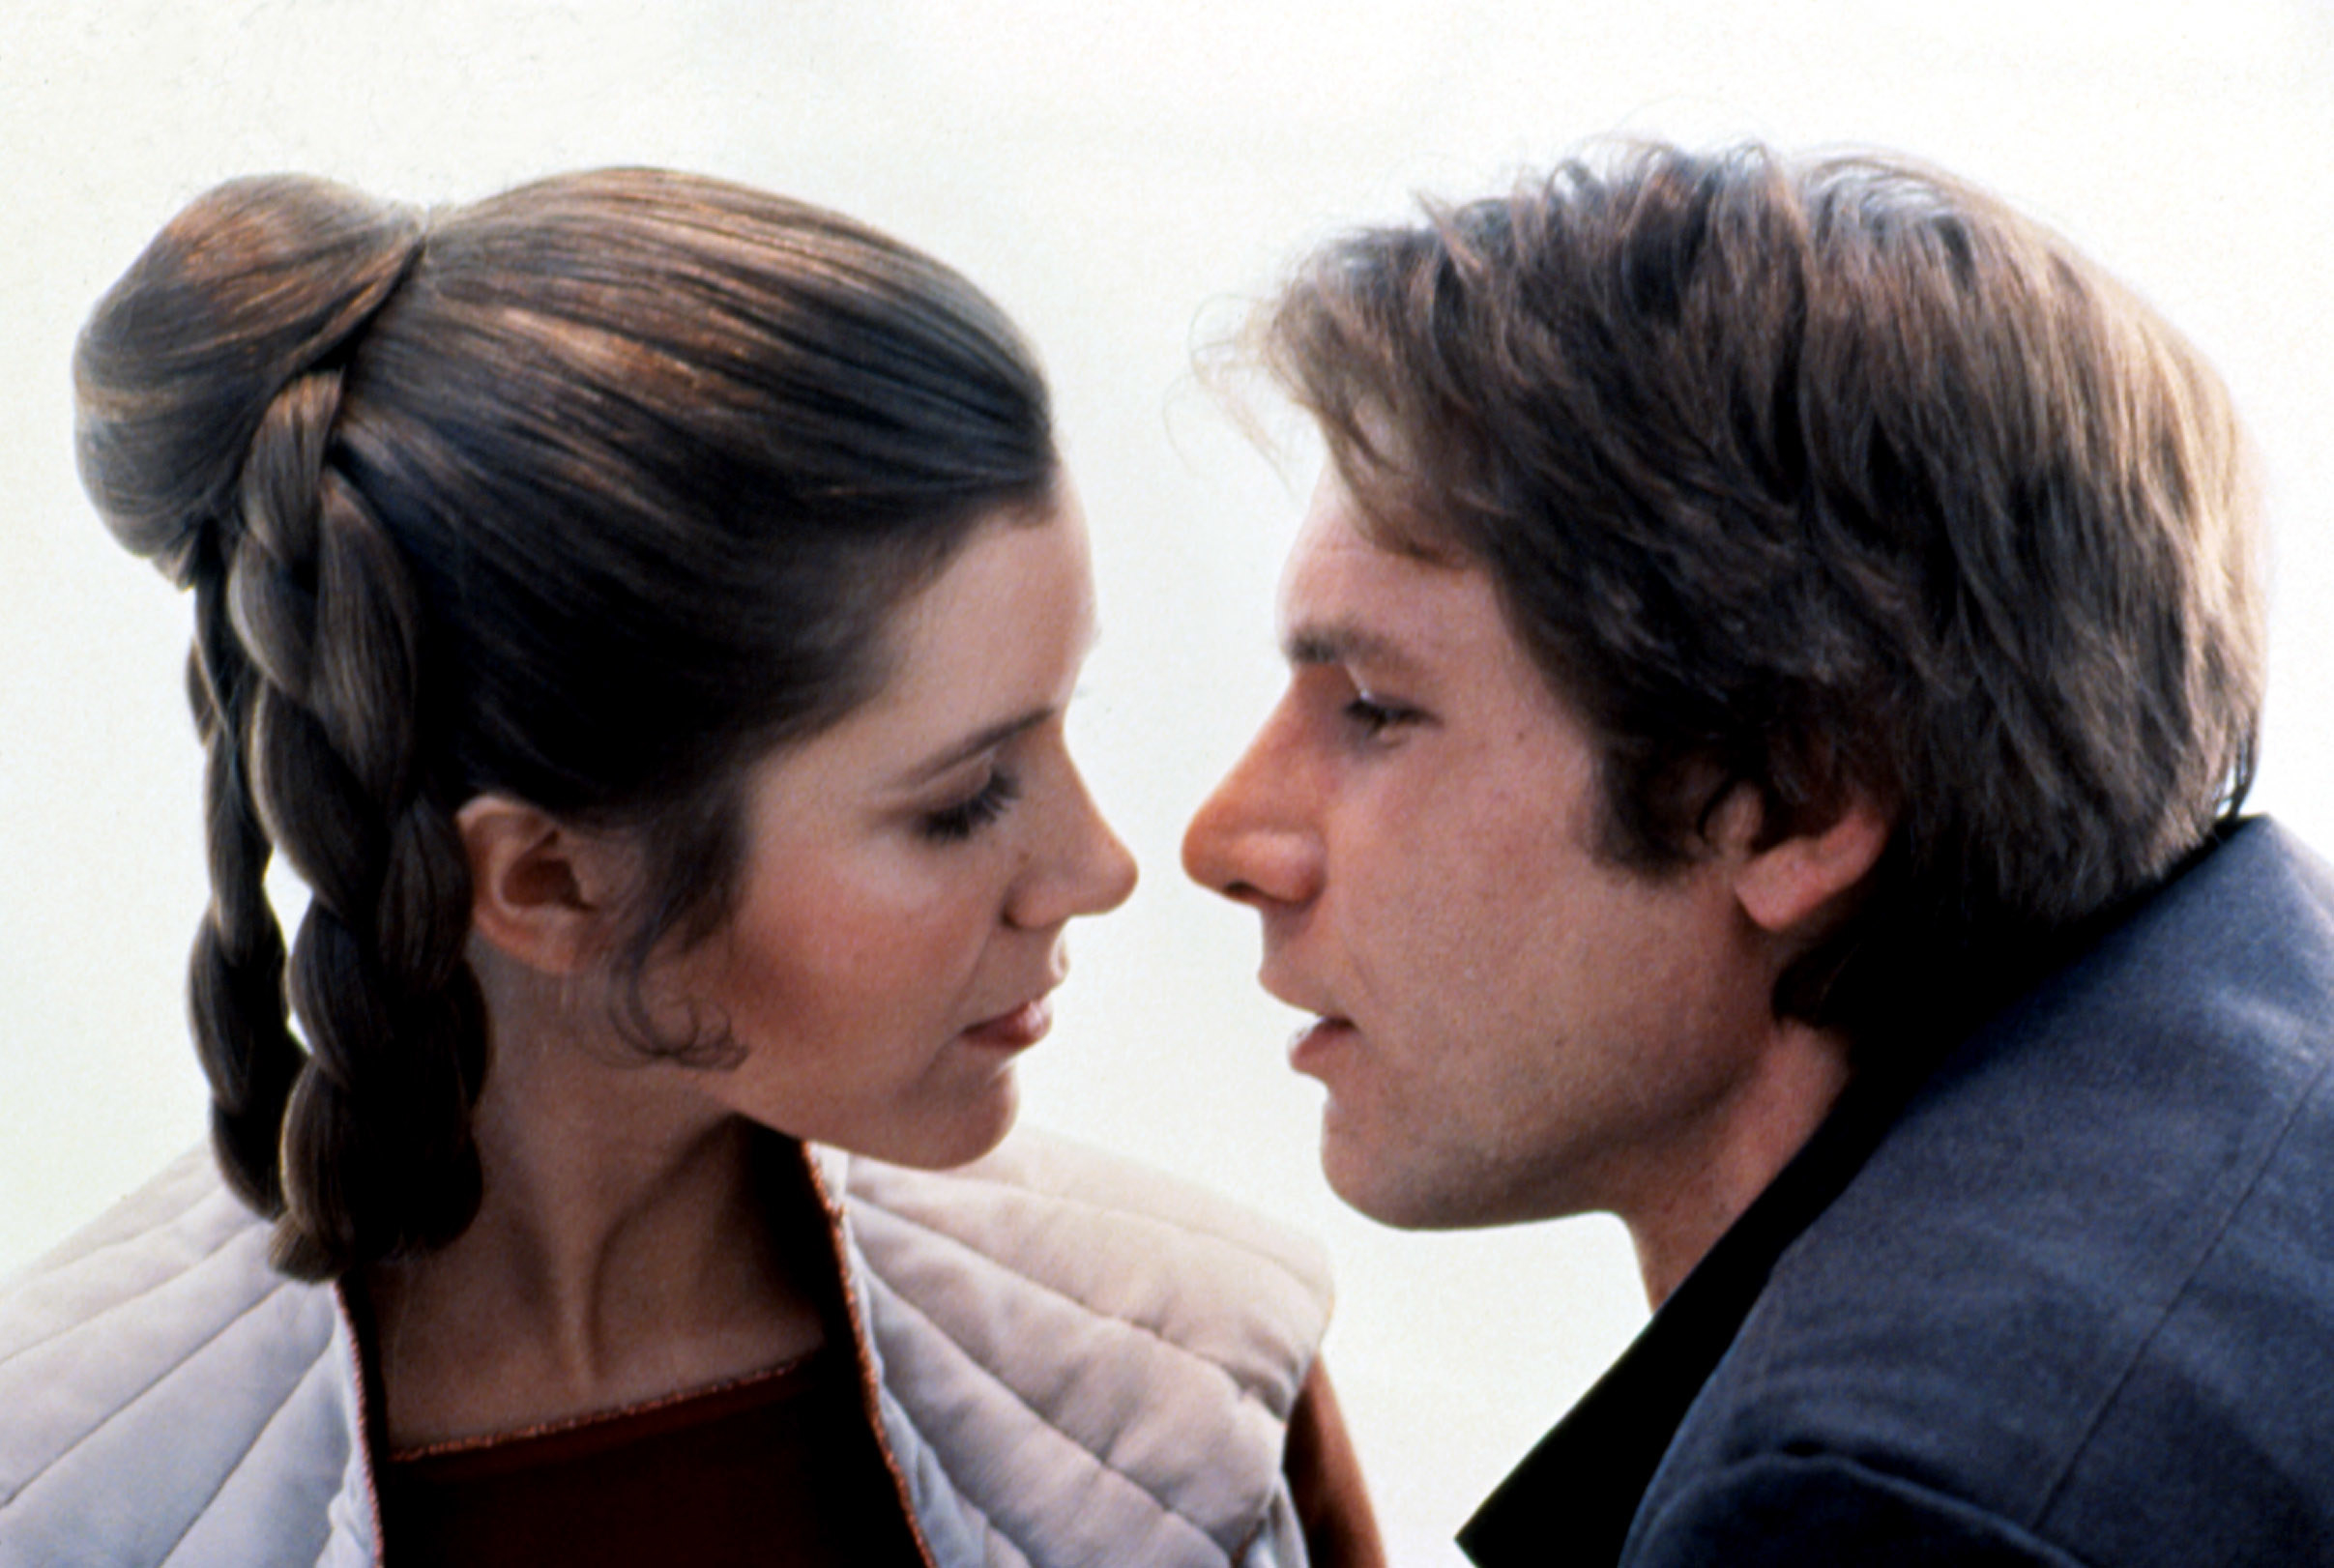 Leia and Han about to kiss